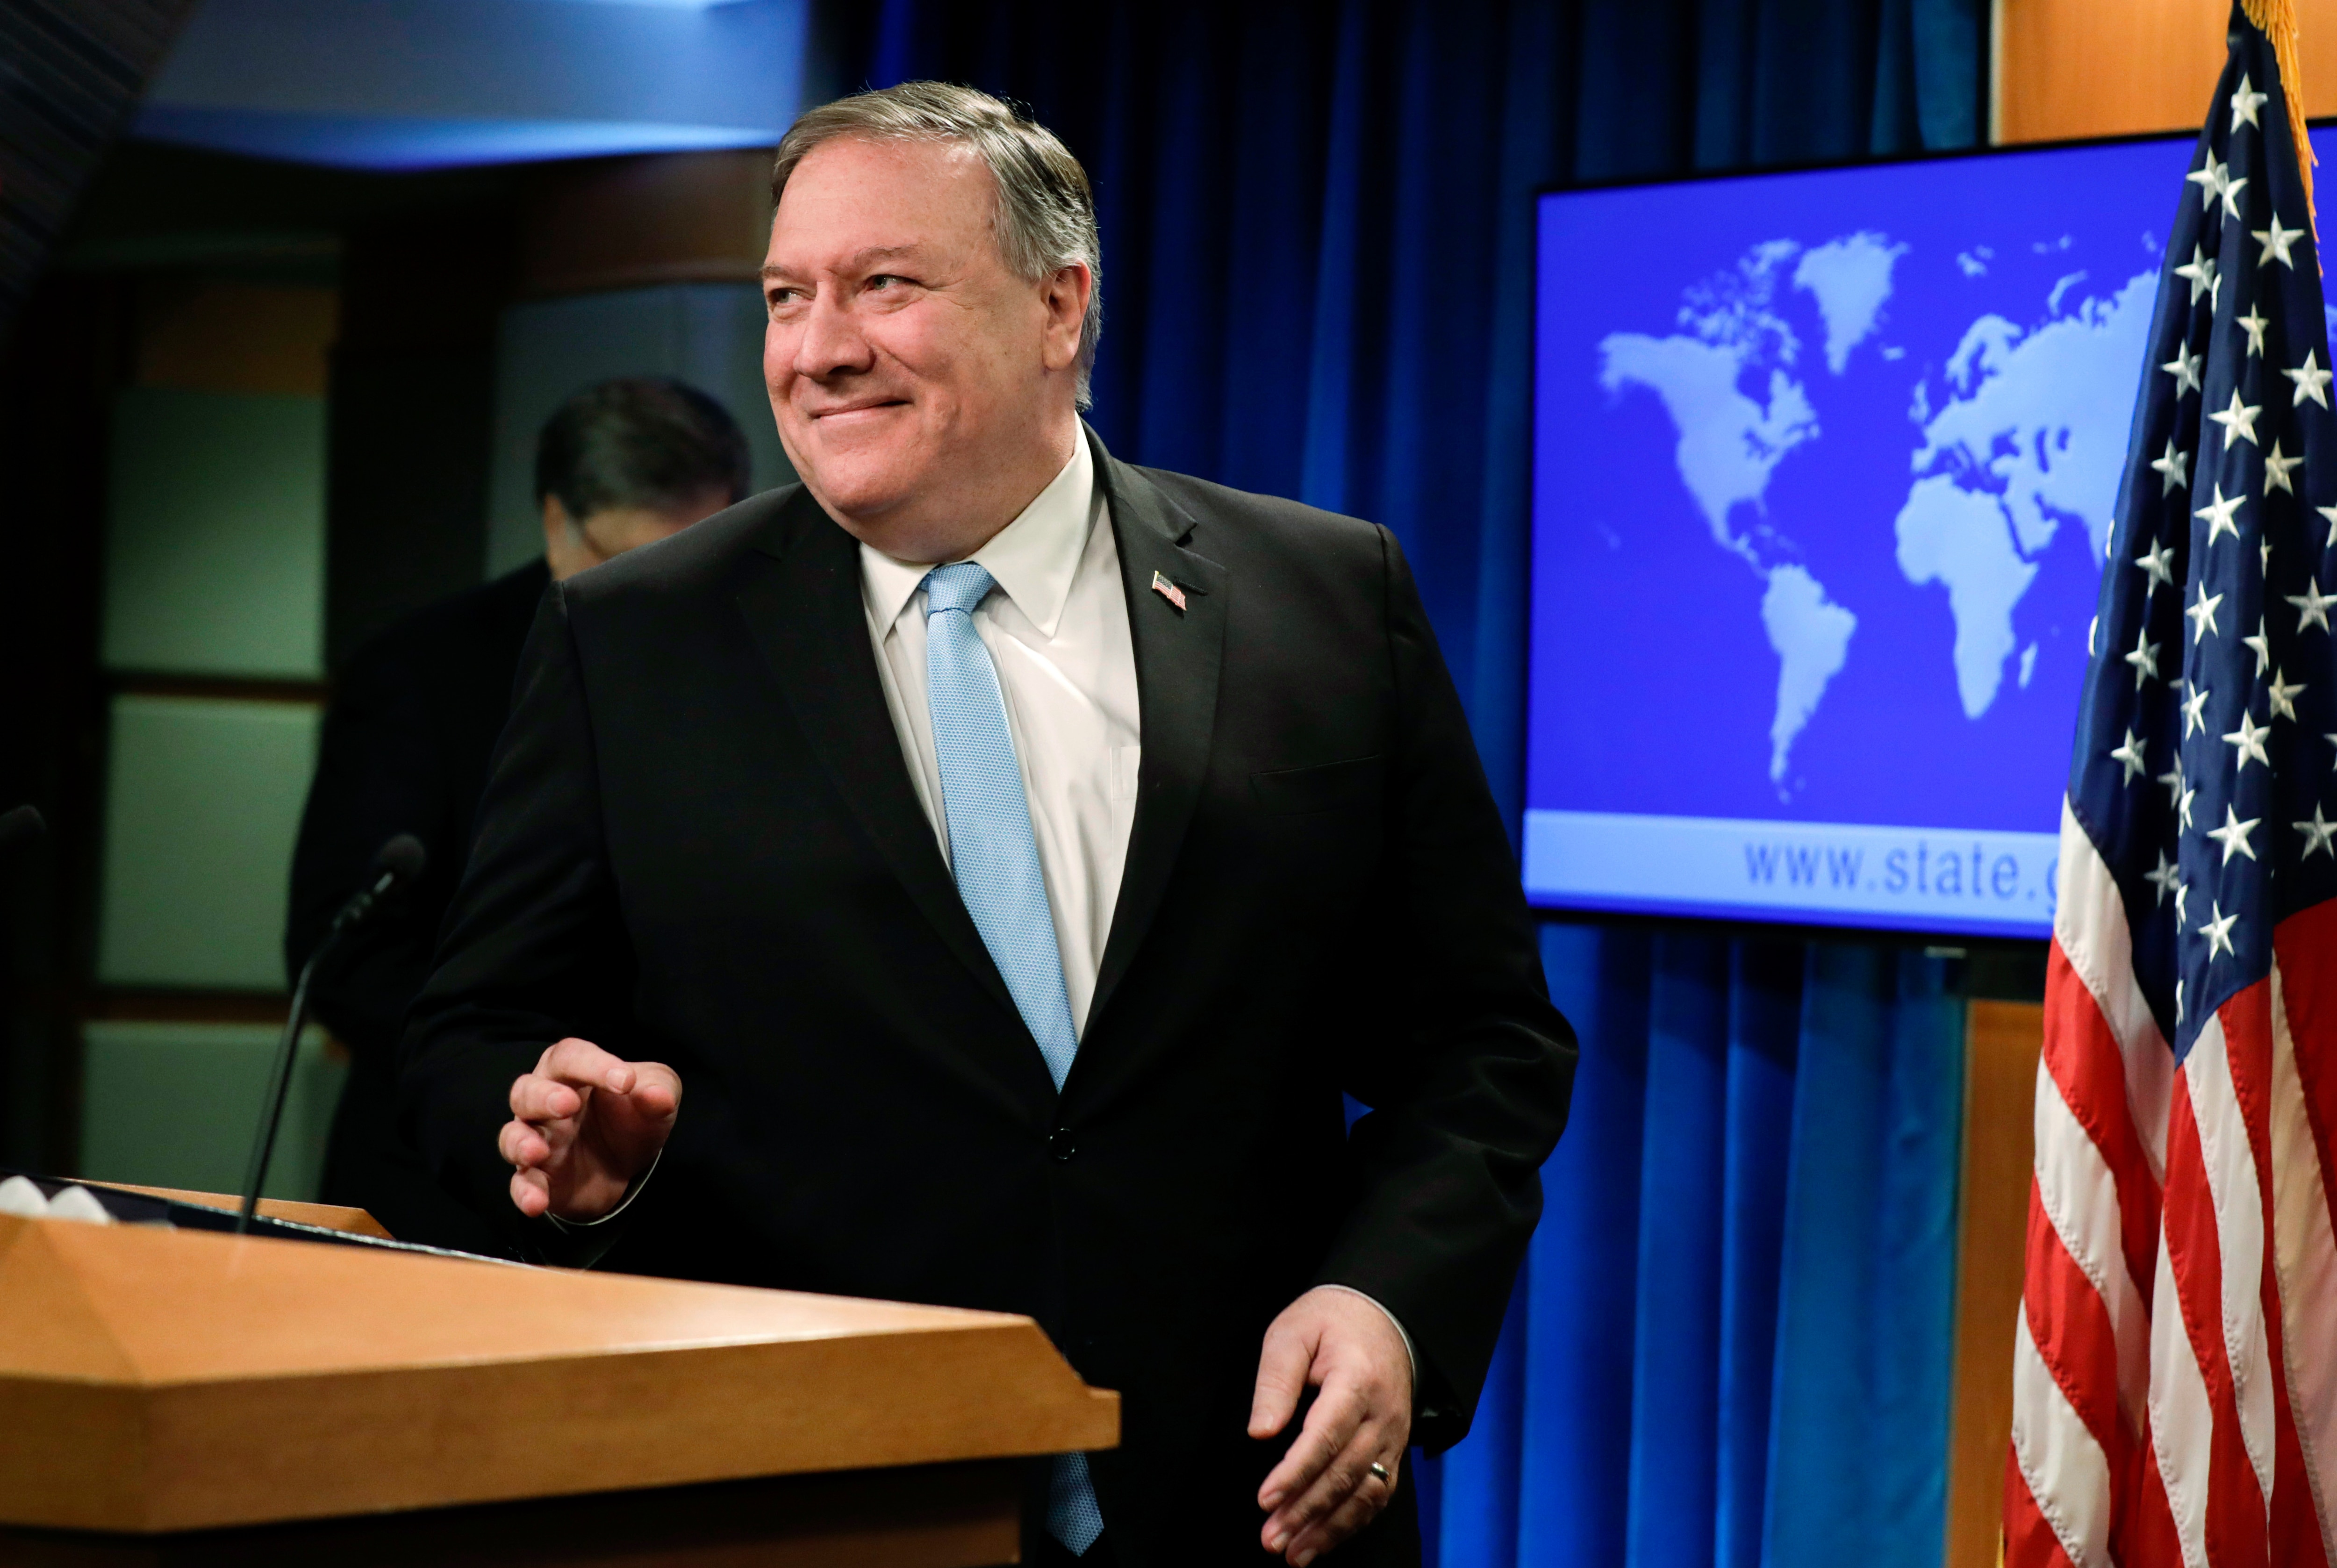 US Secretary of State Mike Pompeo denied there was any hidden message in the photo. 